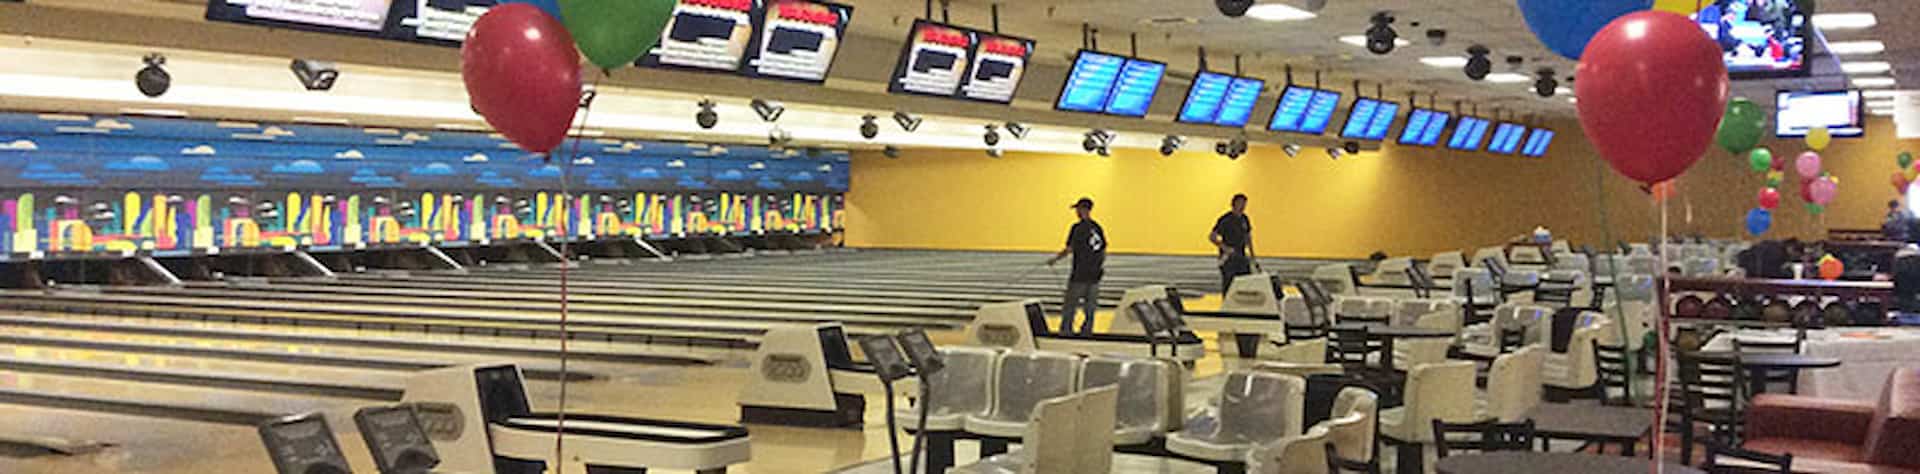 bowling lanes and seating